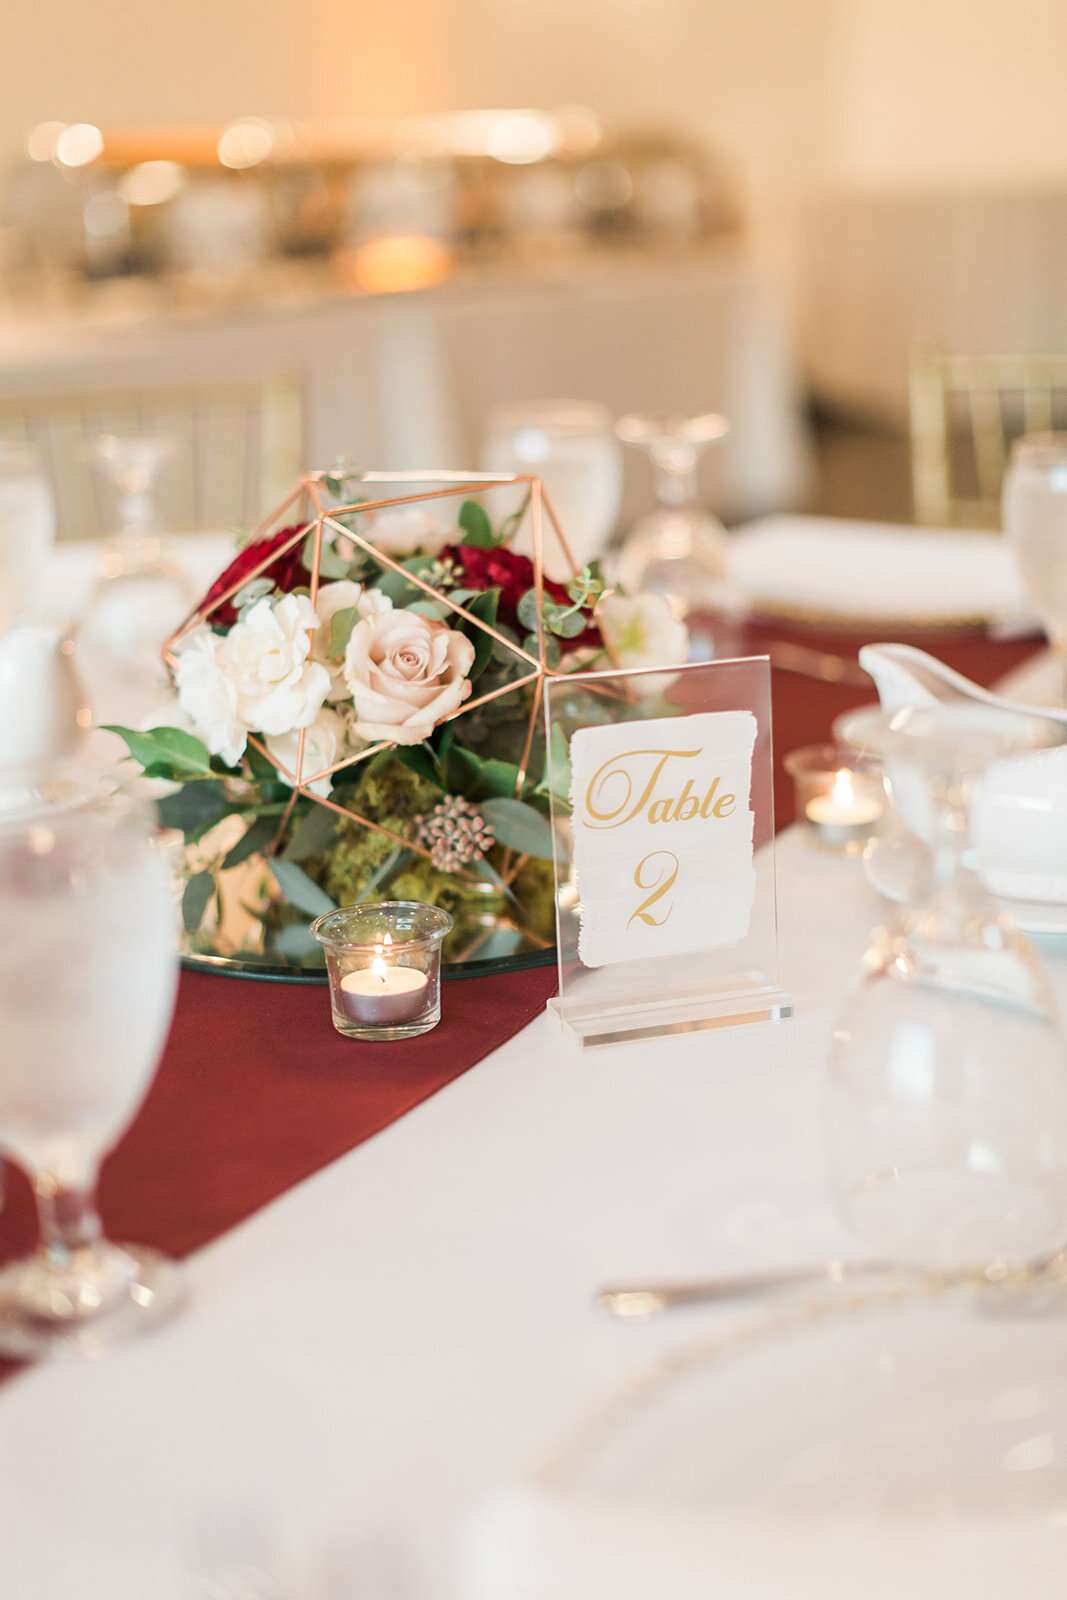 Bluegrass Chic - The Hendricks Photography at Royal Crest Room geometric shapes with floral as centerpieces and aisle markers